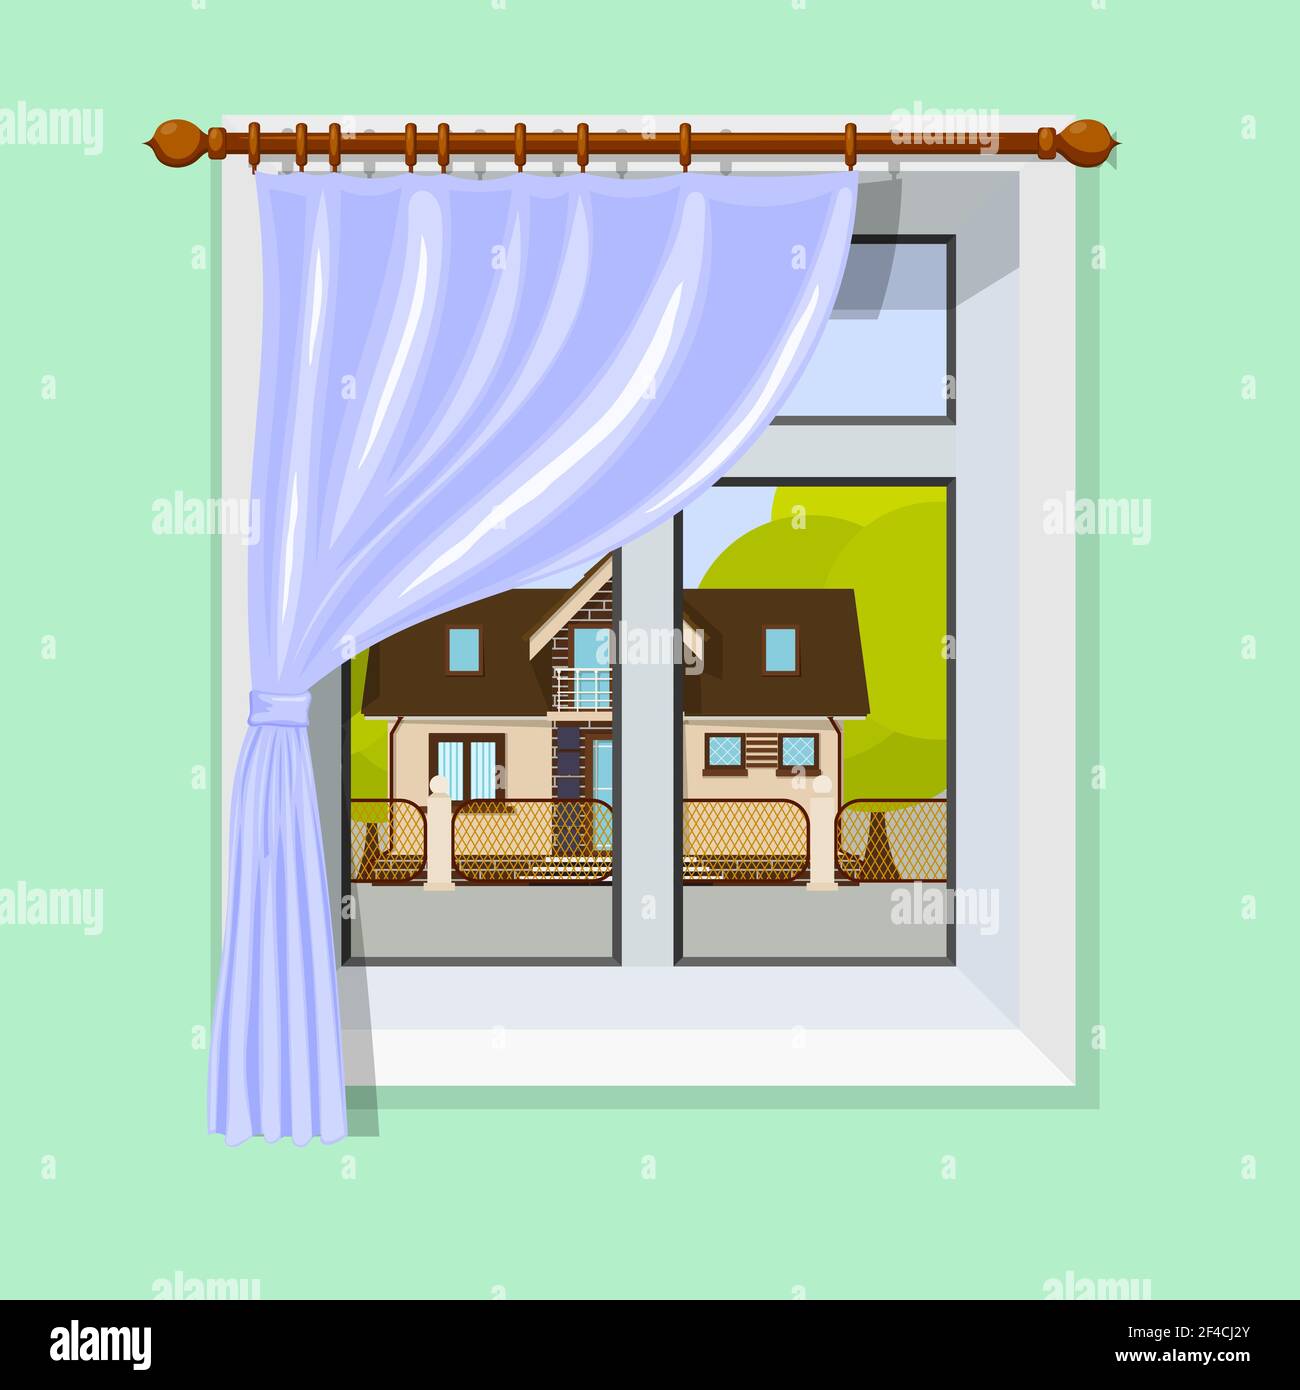 Vector illustration of interior with a window curtain and scenery with a small rural house and trees Stock Vector